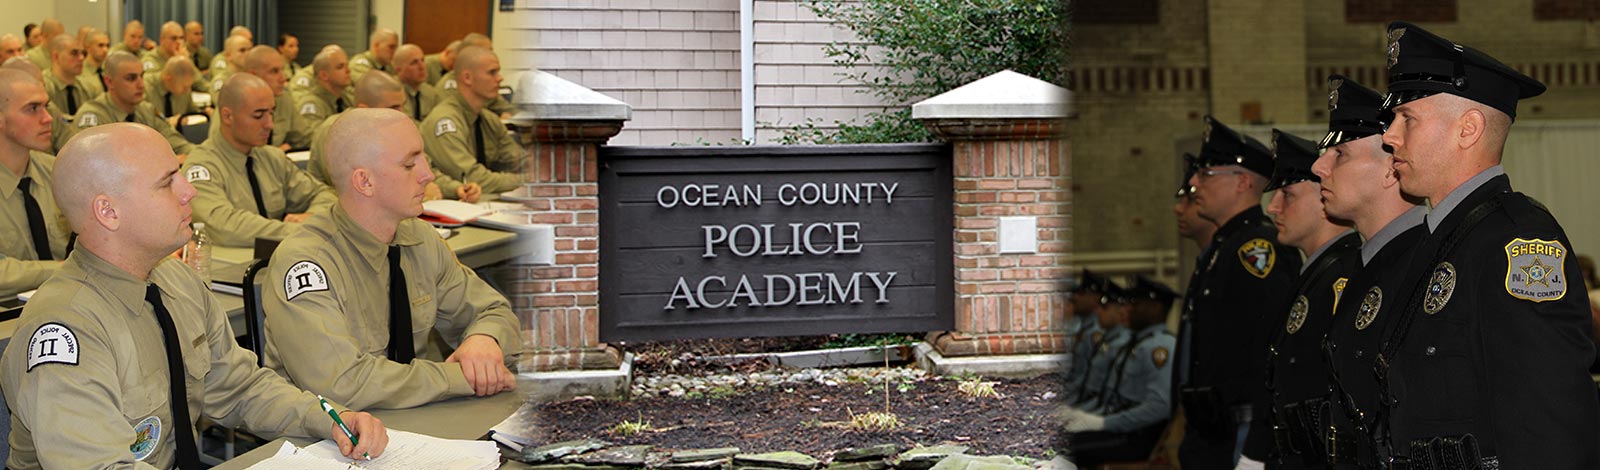 The Sheriff's Office and the Police Academy in Ocean County, New Jersey